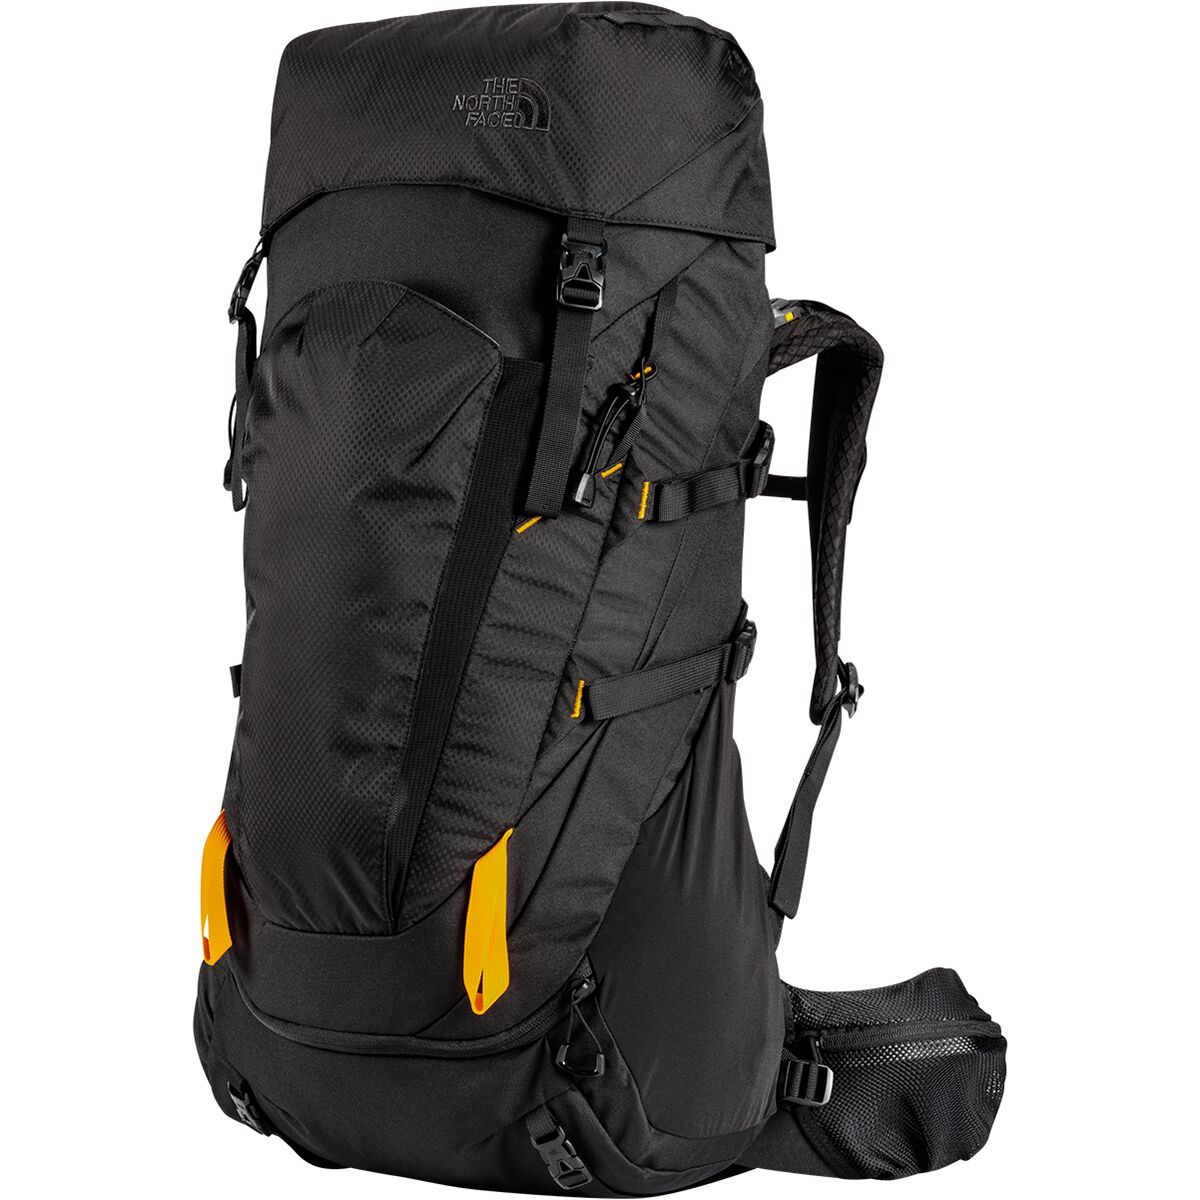 Malfunction And team Email The North Face Terra 40L Backpack - Hike & Camp